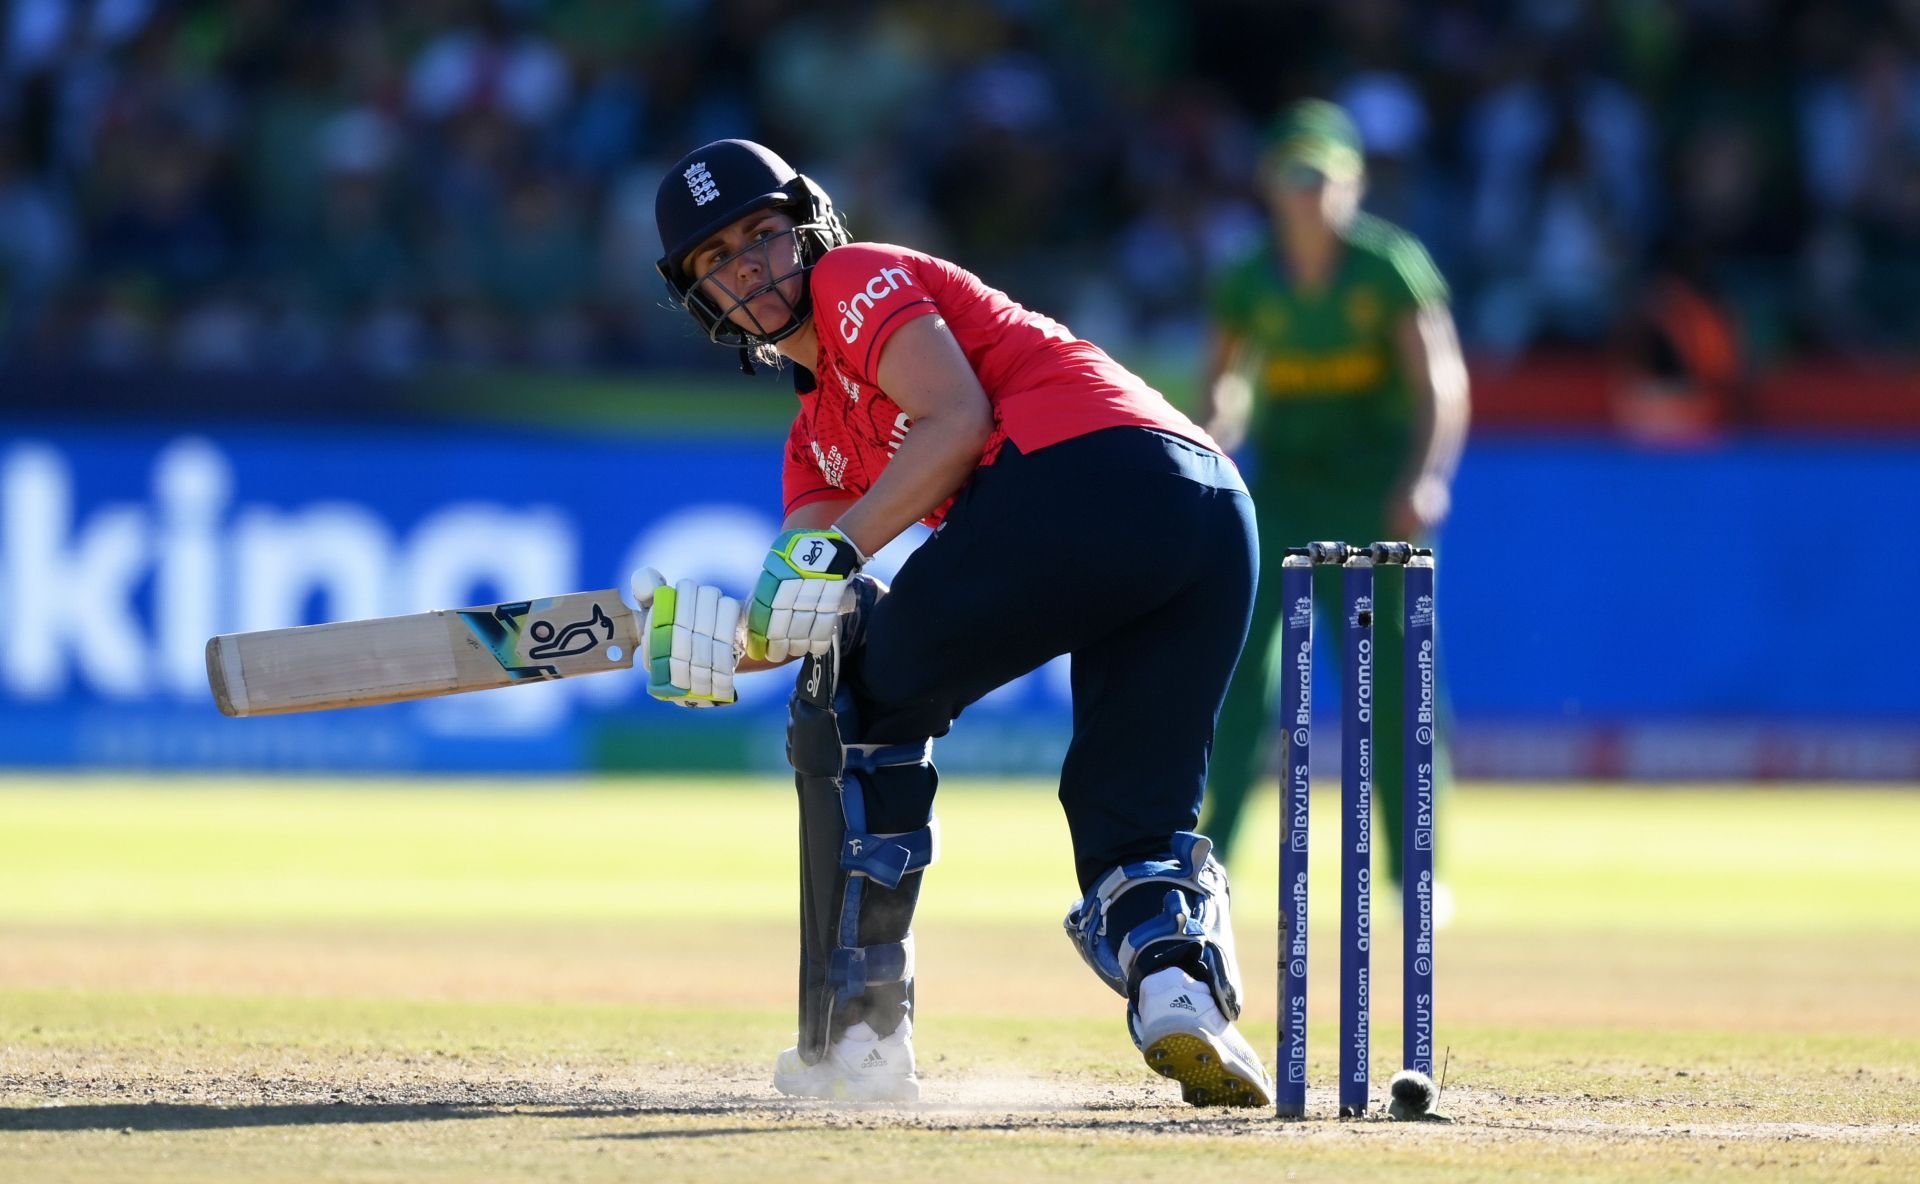 Nat Sciver-Brunt has been terrific for England. Pic: Getty Images